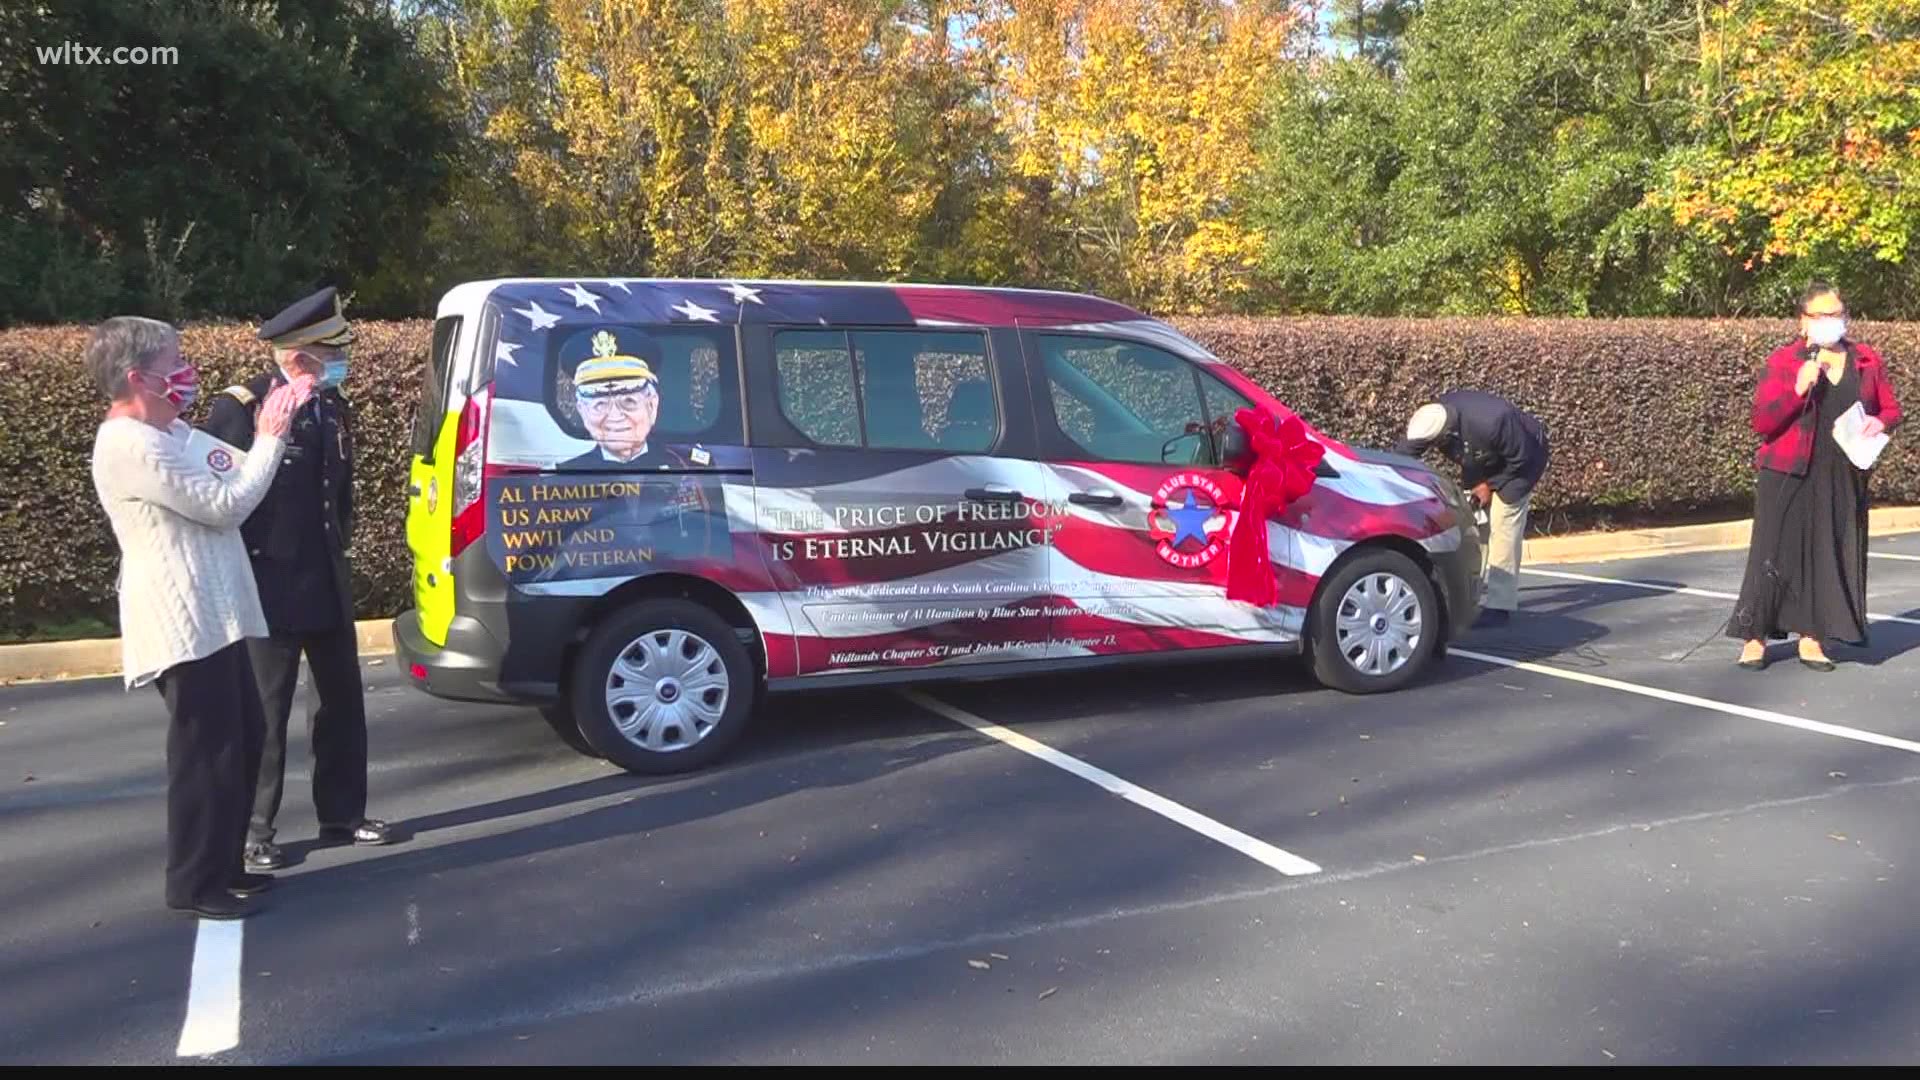 The van will be used to transport veterans to their medical checkups.